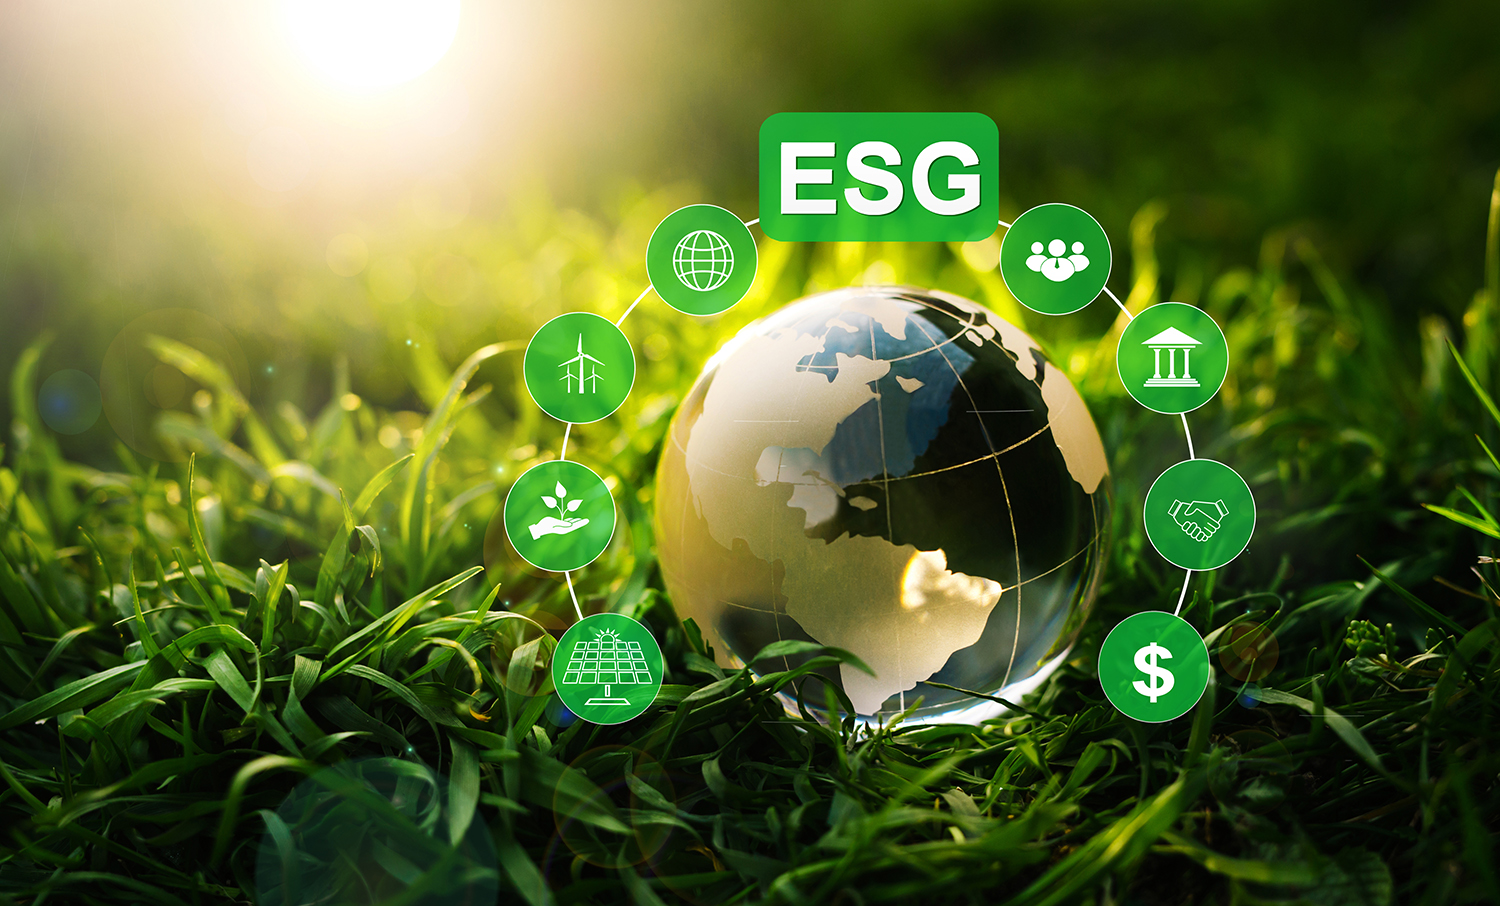 crystal globe and esg icons on green background.environment social and governance in sustainable and ethical business.using technology of renewable resource to reduce pollution